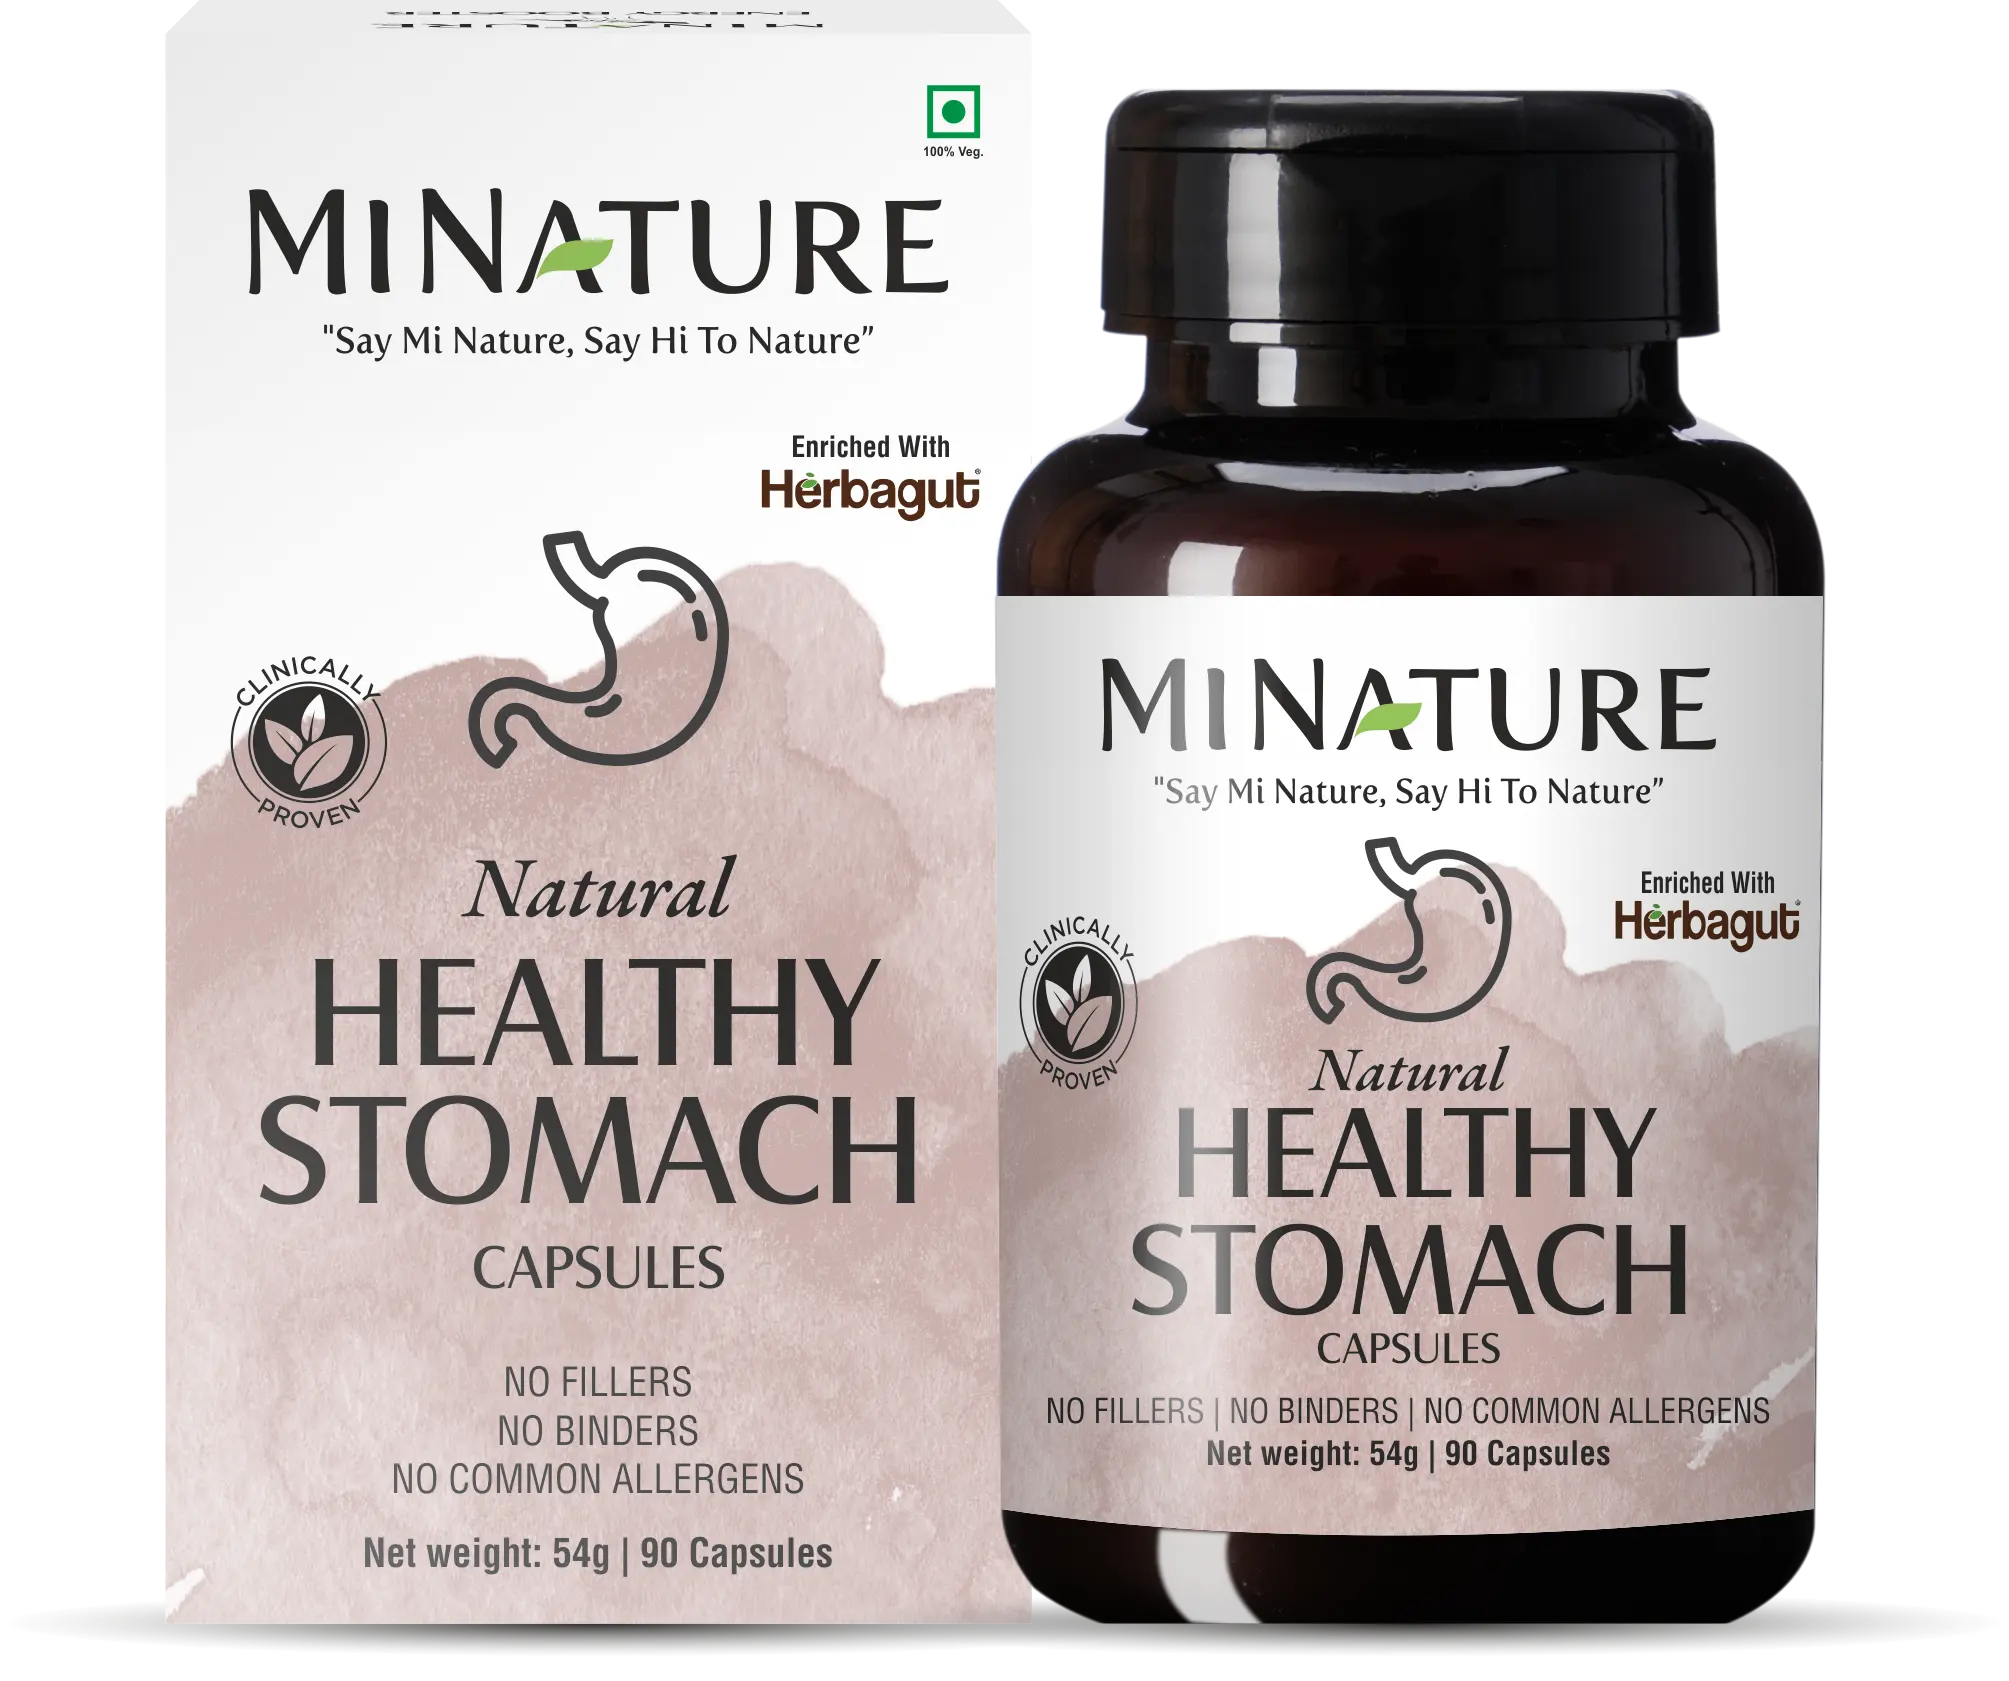 MI NATURE NATURAL HEALTHY STOMACH CAPSULES